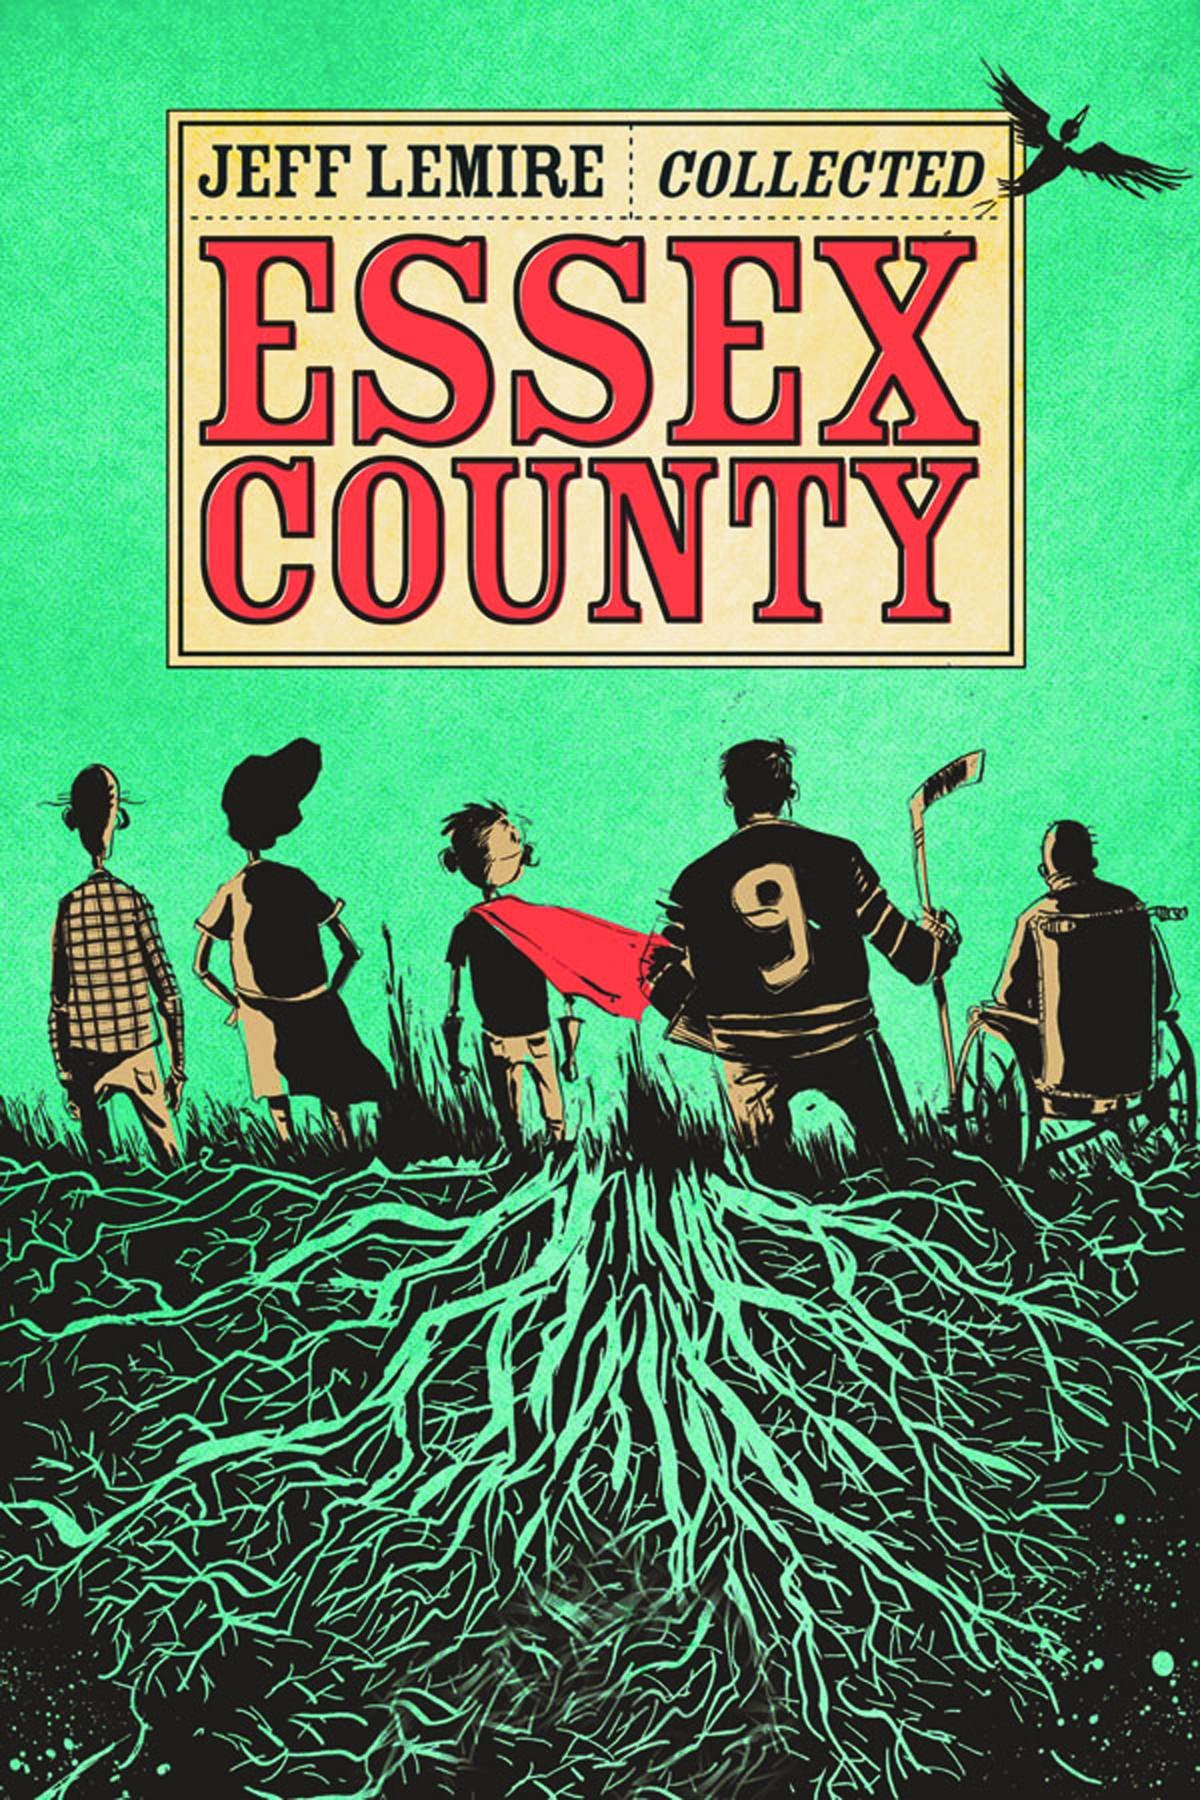 ESSEX COUNTRY